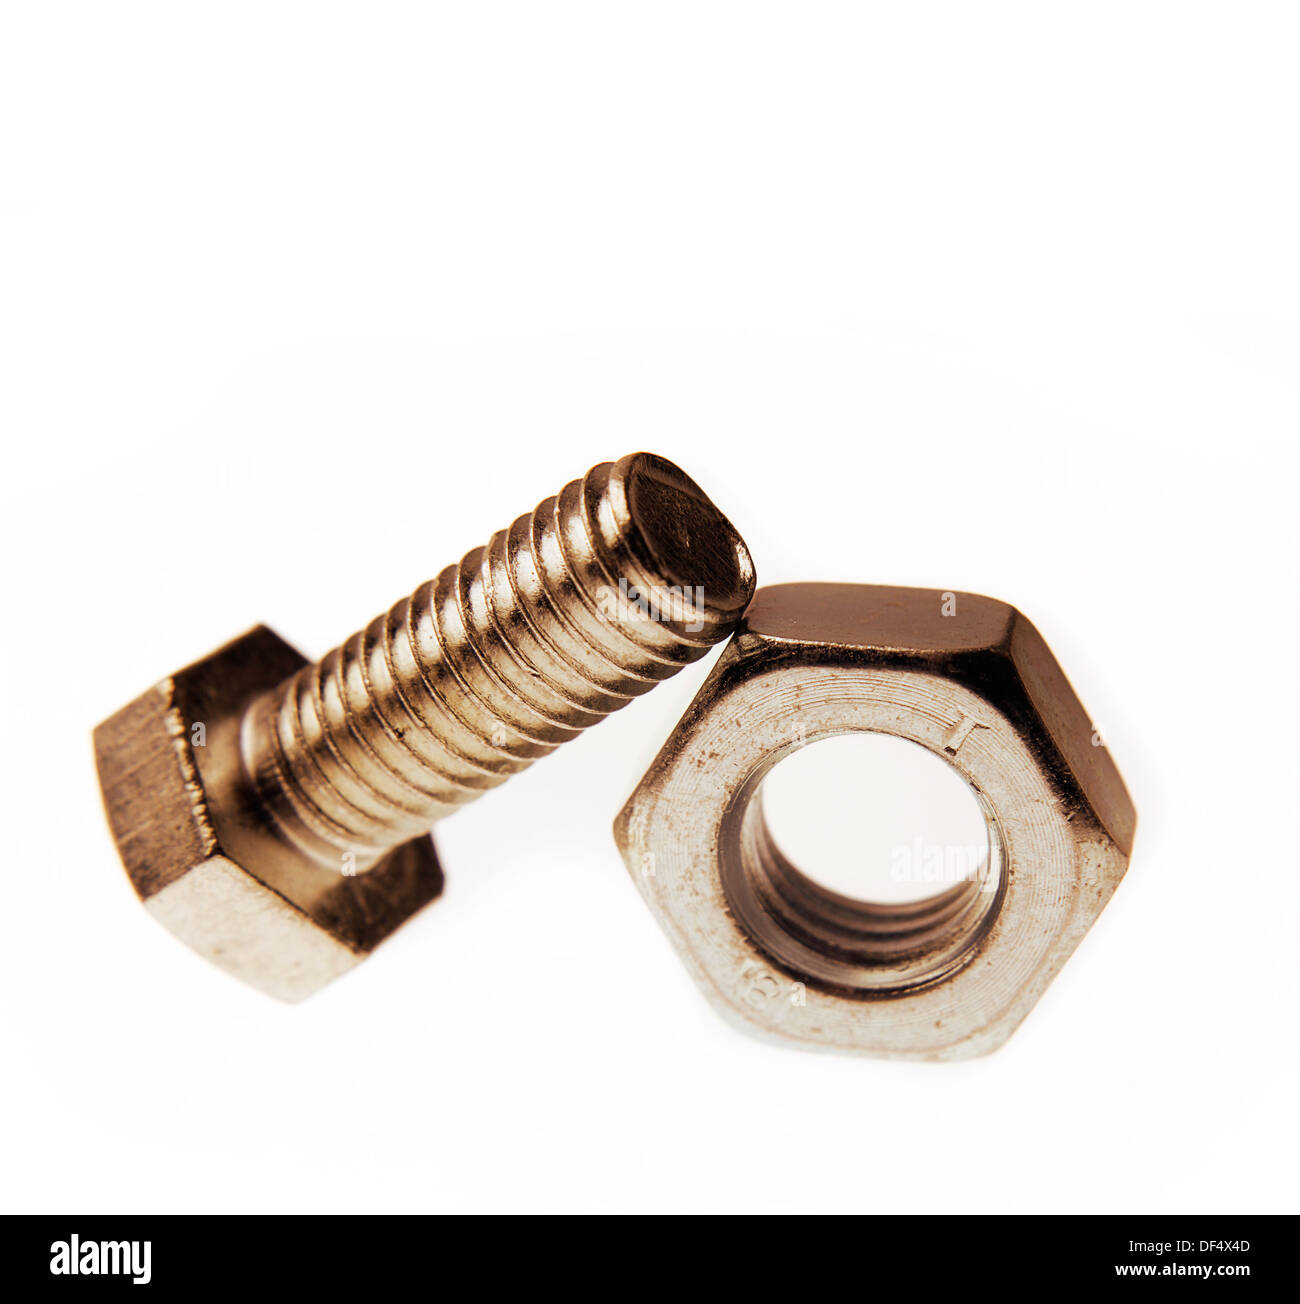 Nut and bolt together on plain background Stock Photo